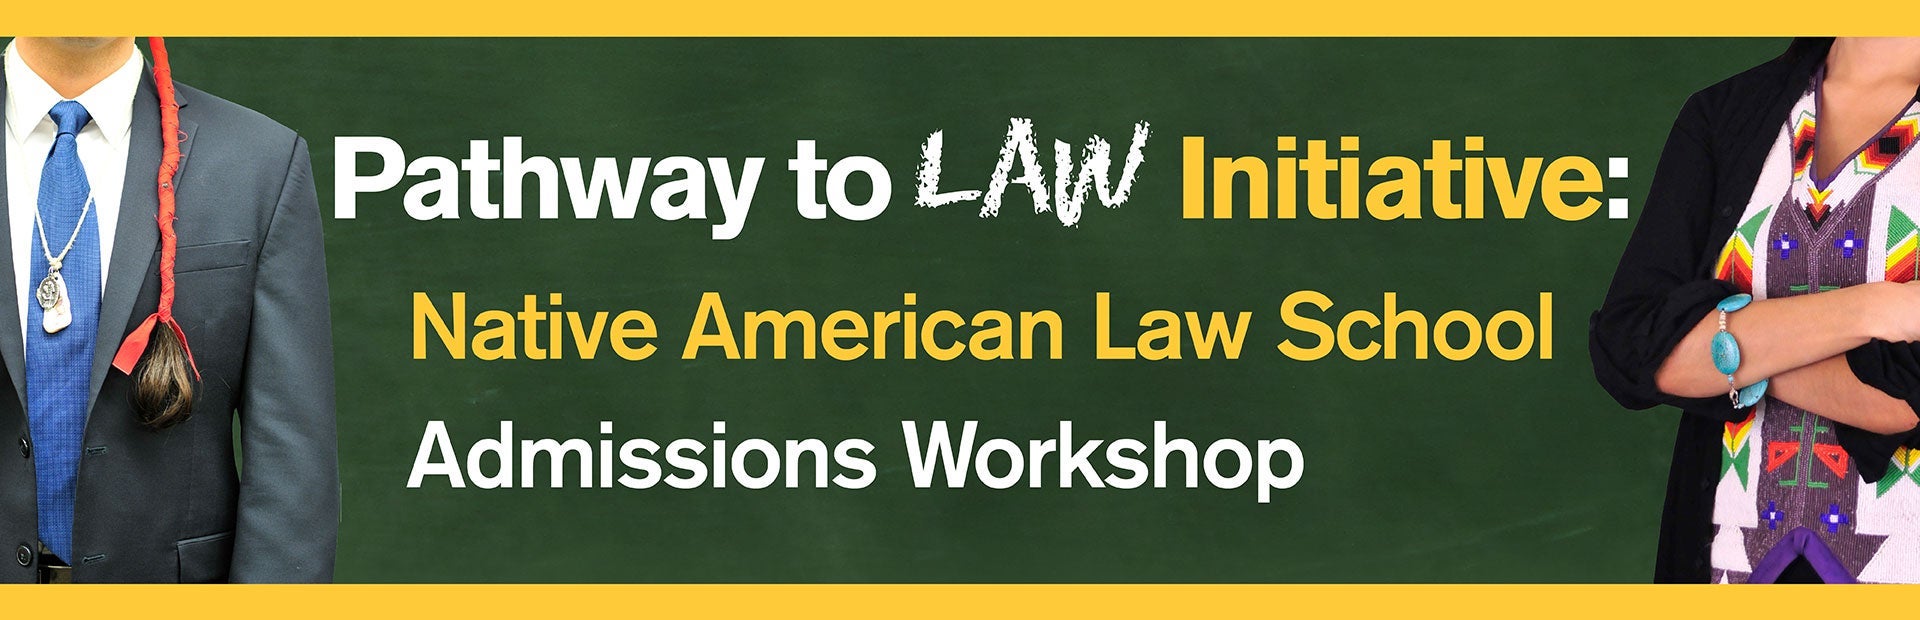 Pathway to Law Initiative